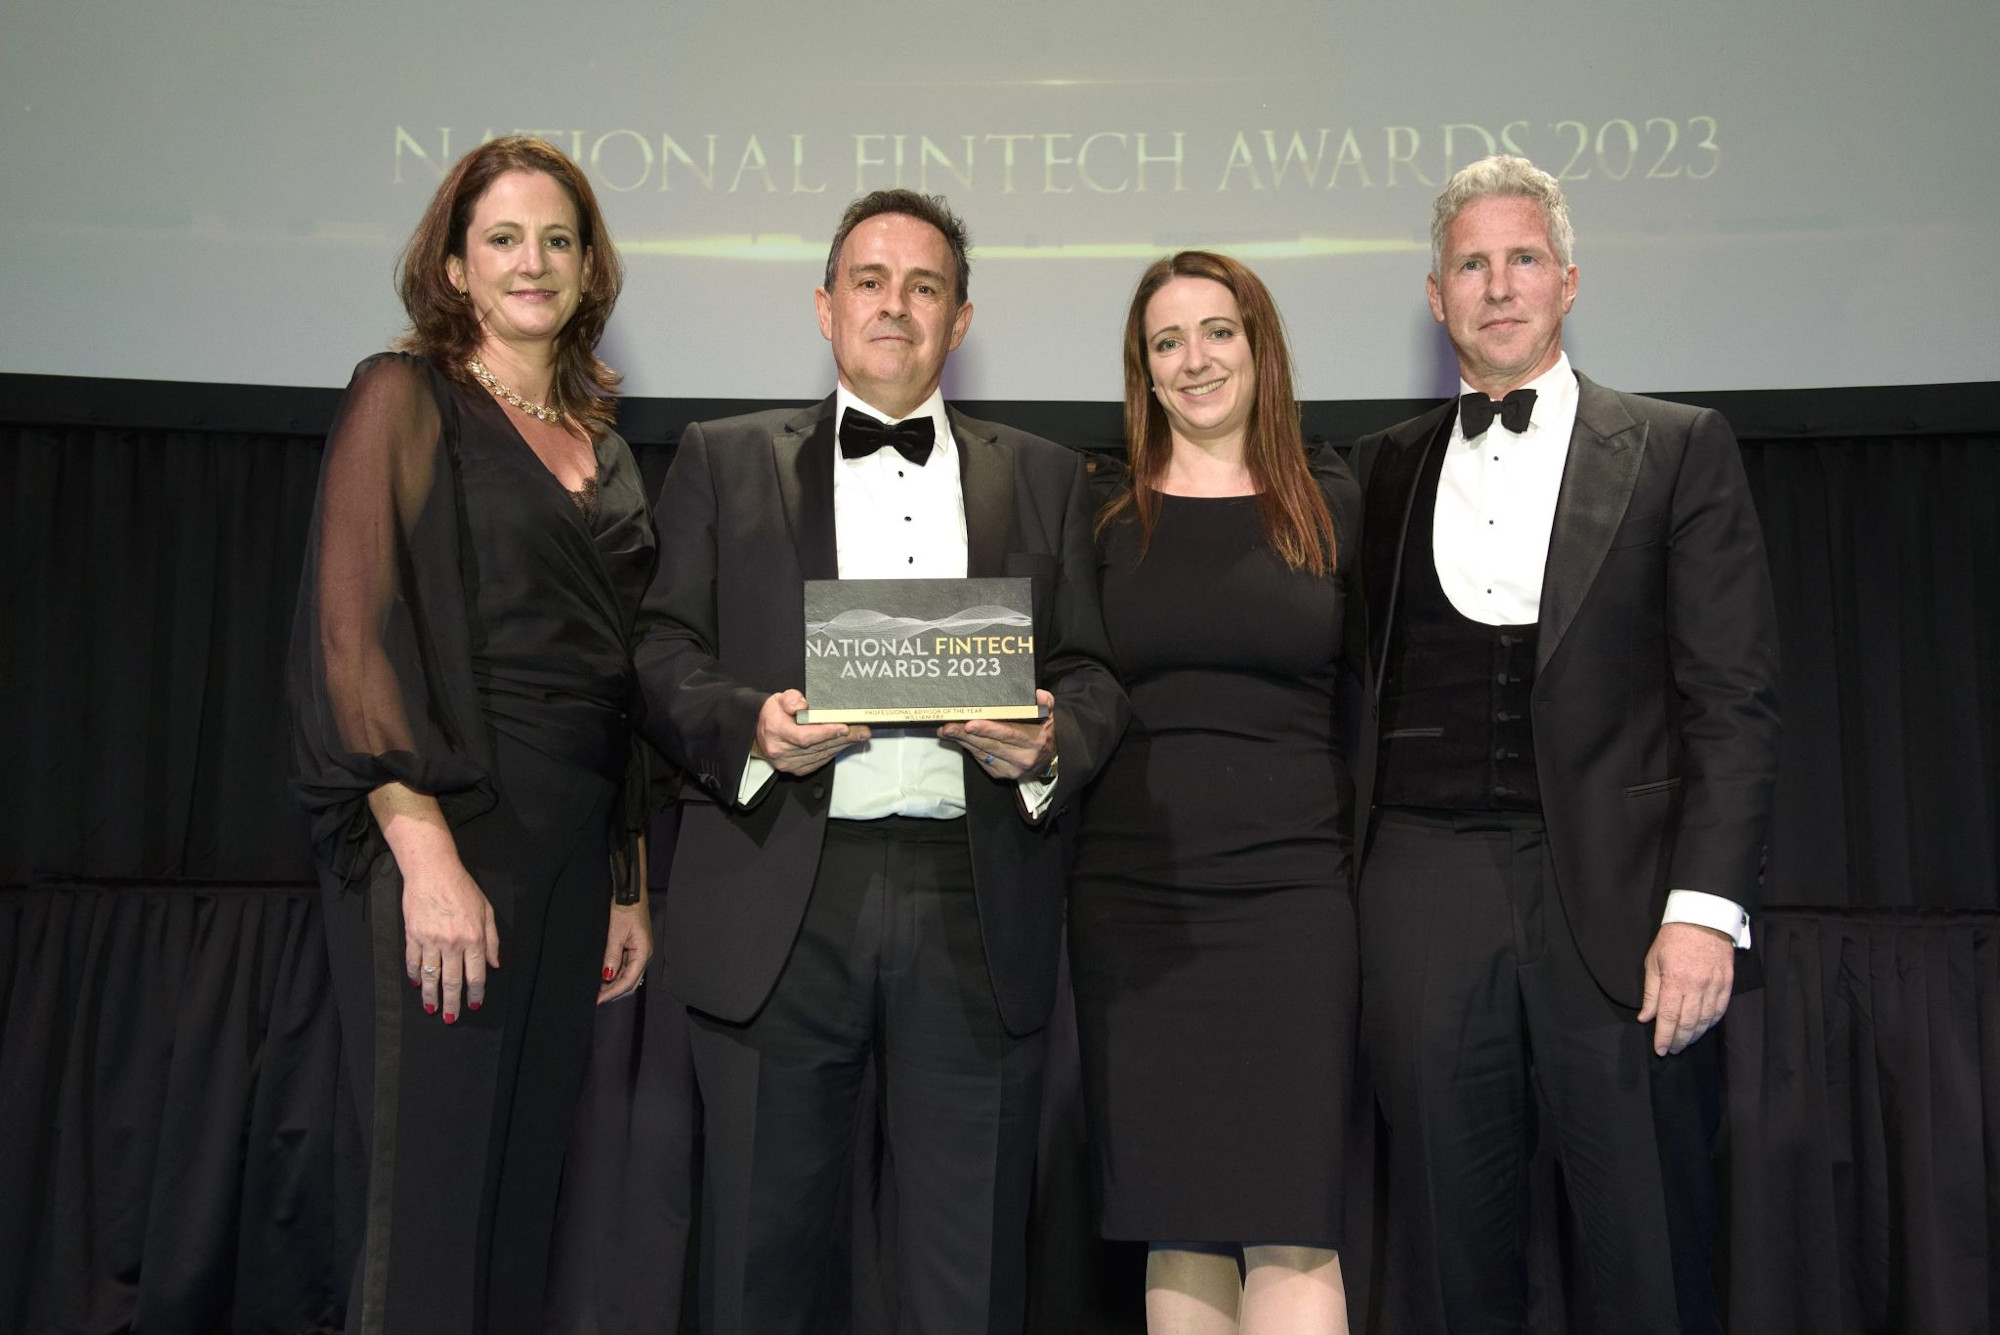 #InPictures: William Fry recognised at National Fintech Awards